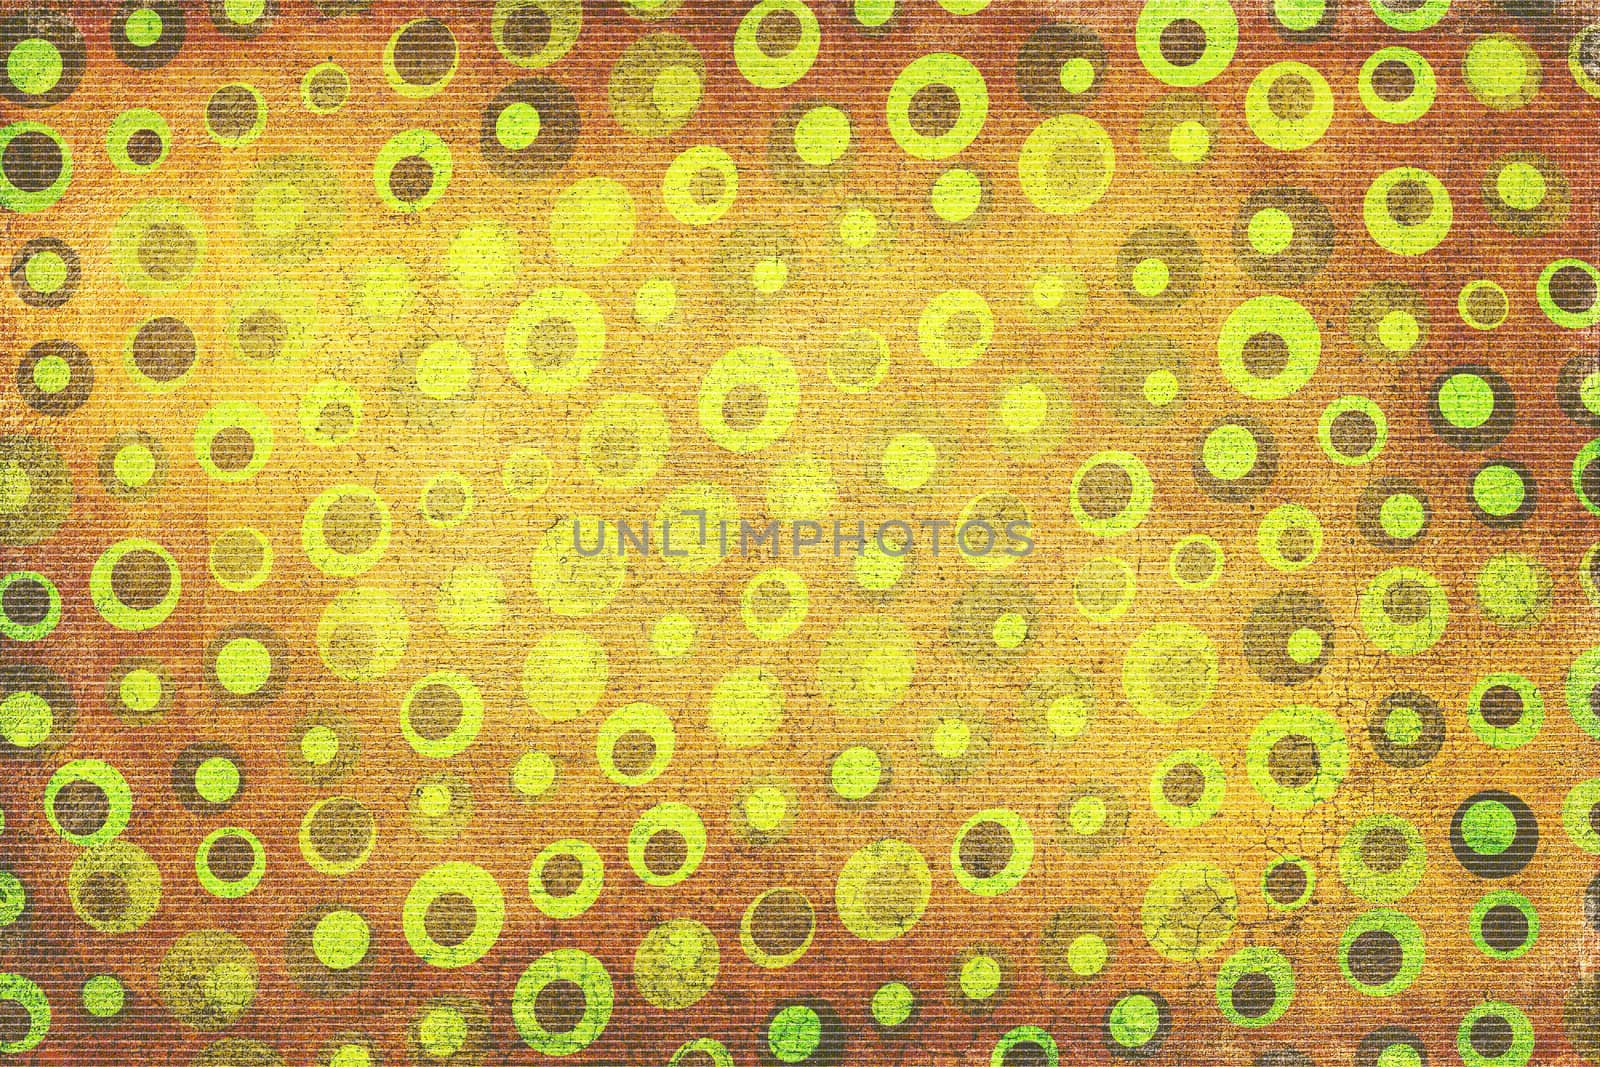 Orange, yellow, gold and brown texture background with dots, circles, and lines